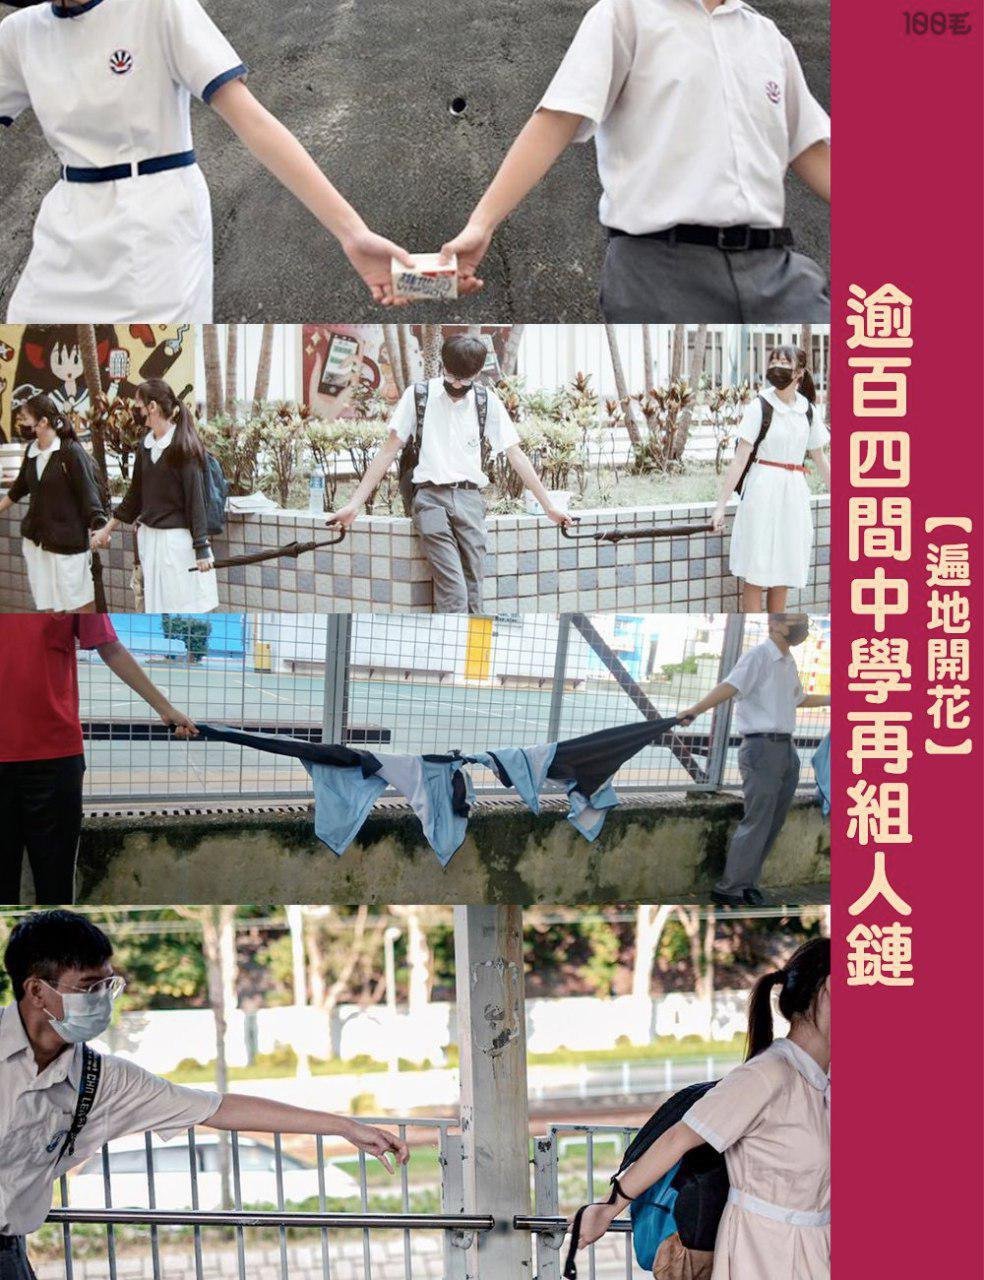 Four photographs depicting middle/high schoolers, in masks, forming human chains as part of peaceful protests. None of them are holding hands directly, but rather holding onto objects together: boxes of soybean milk, umbrellas, clothes. On the side, written vertically in Chinese, is: "Blossoming everywhere: over 140 secondary schools form a human chain."